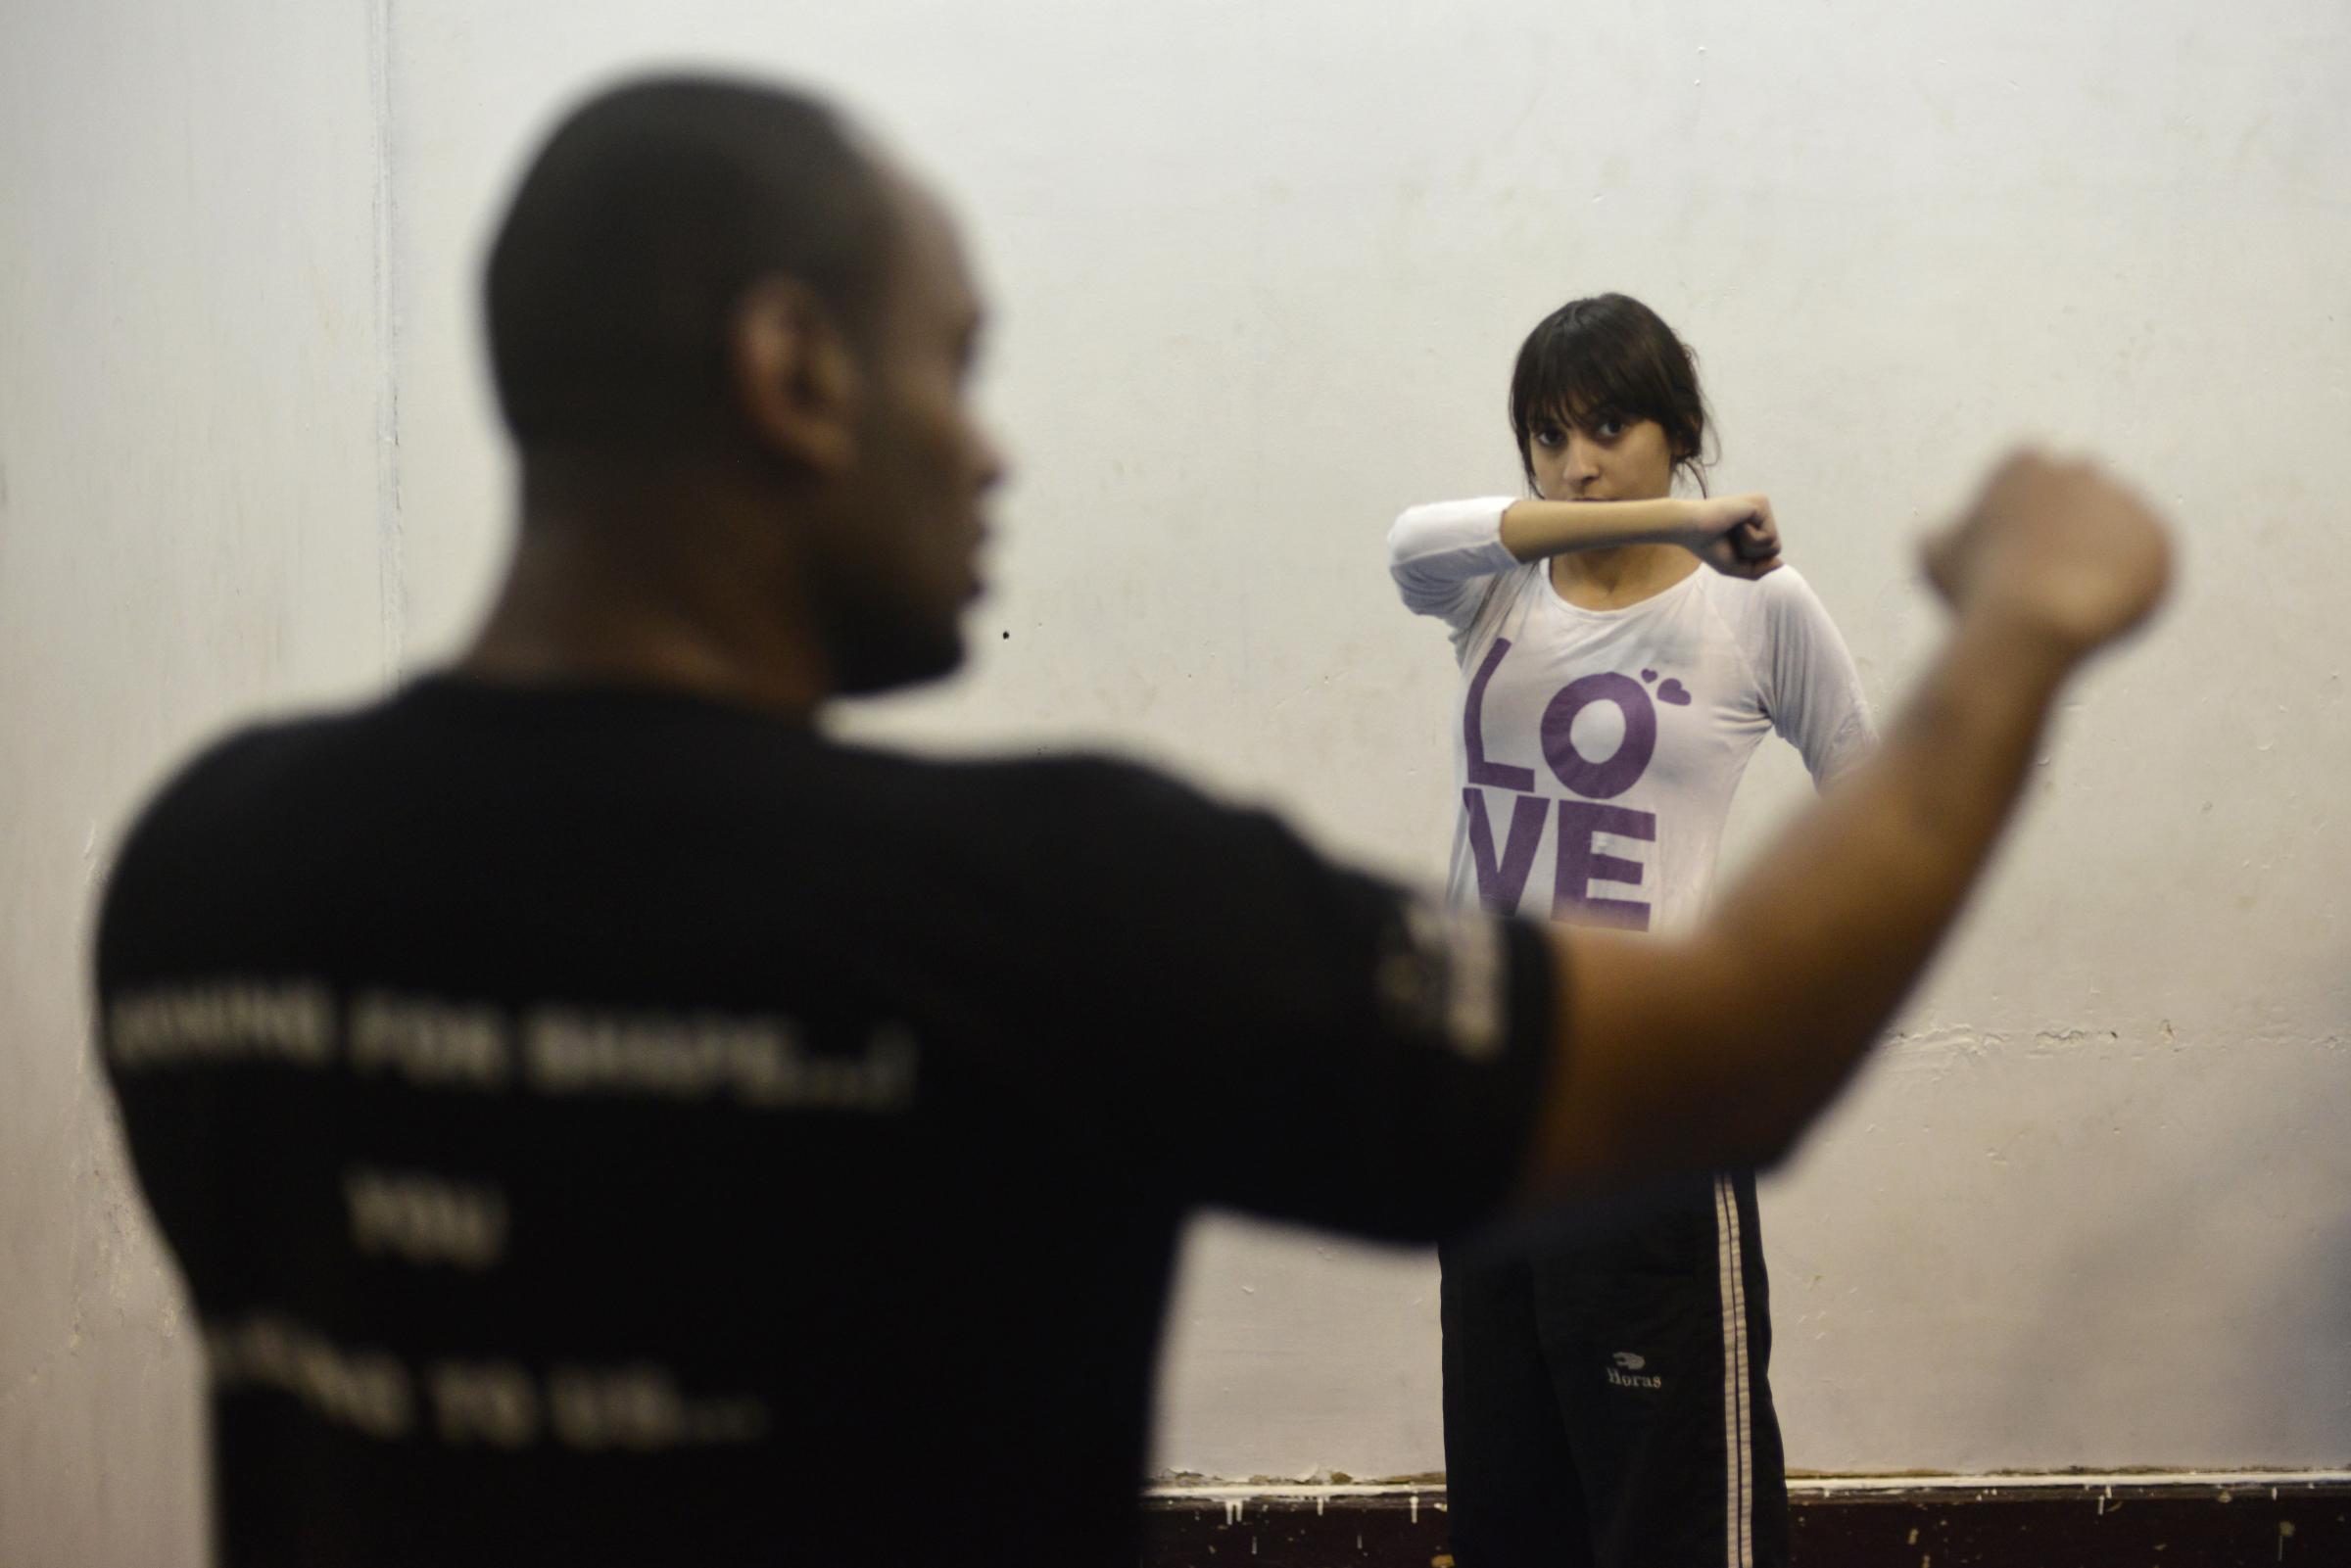 Empowering women  - A self-defense class held by "Take your right by...